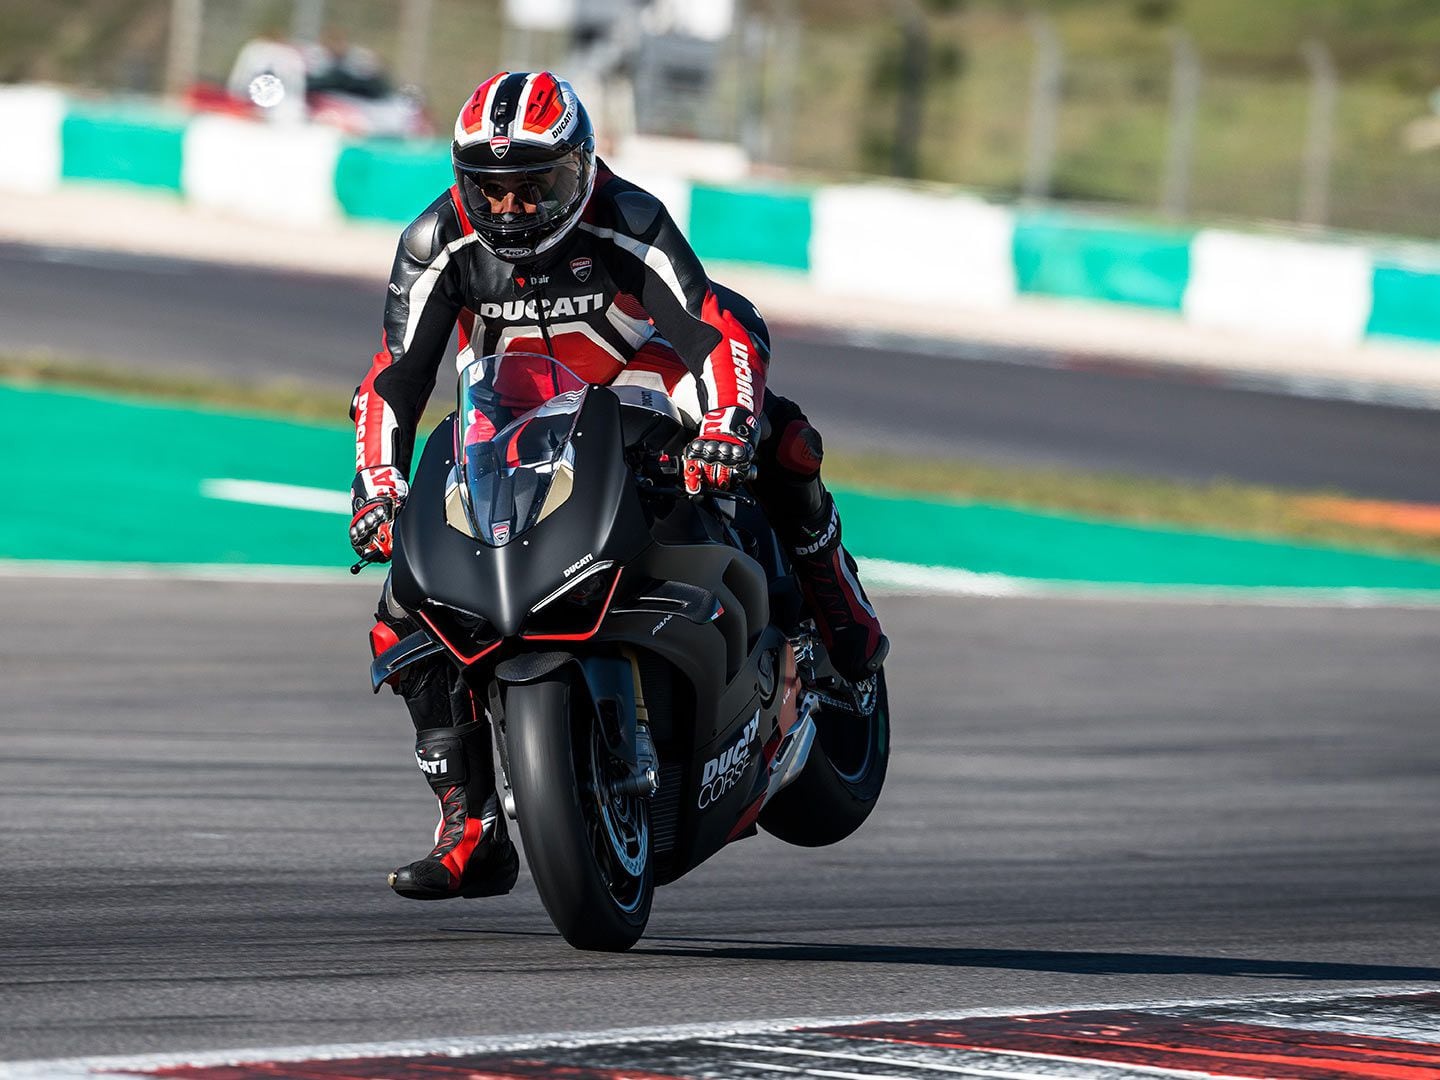 Stoppie on by! Brembo Stylema R front brakes keep corner entry speeds high and tight.